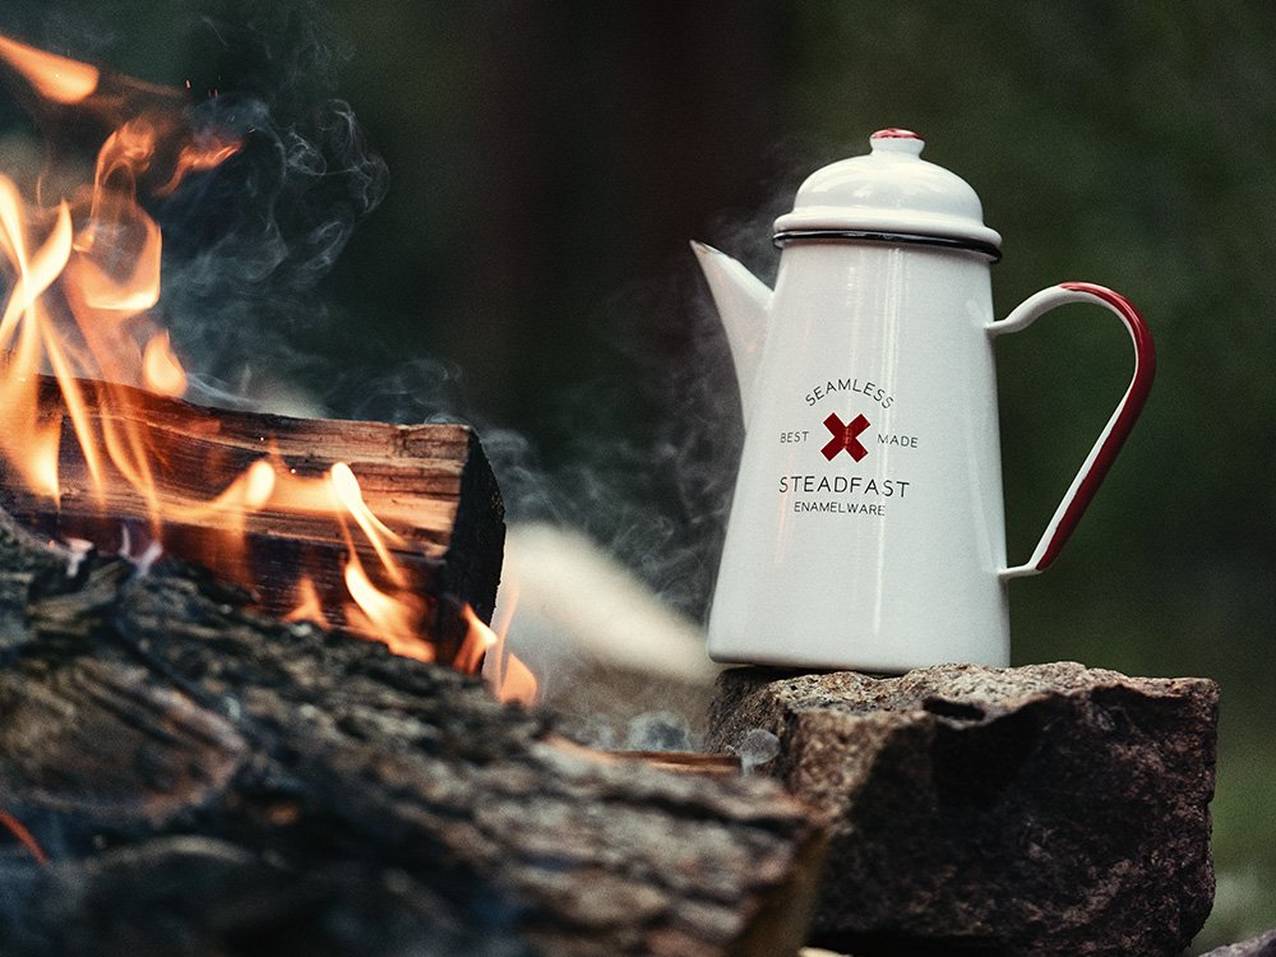 The white Best Made Enamel Cowboy Coffee Kettle sits next to a campfire.